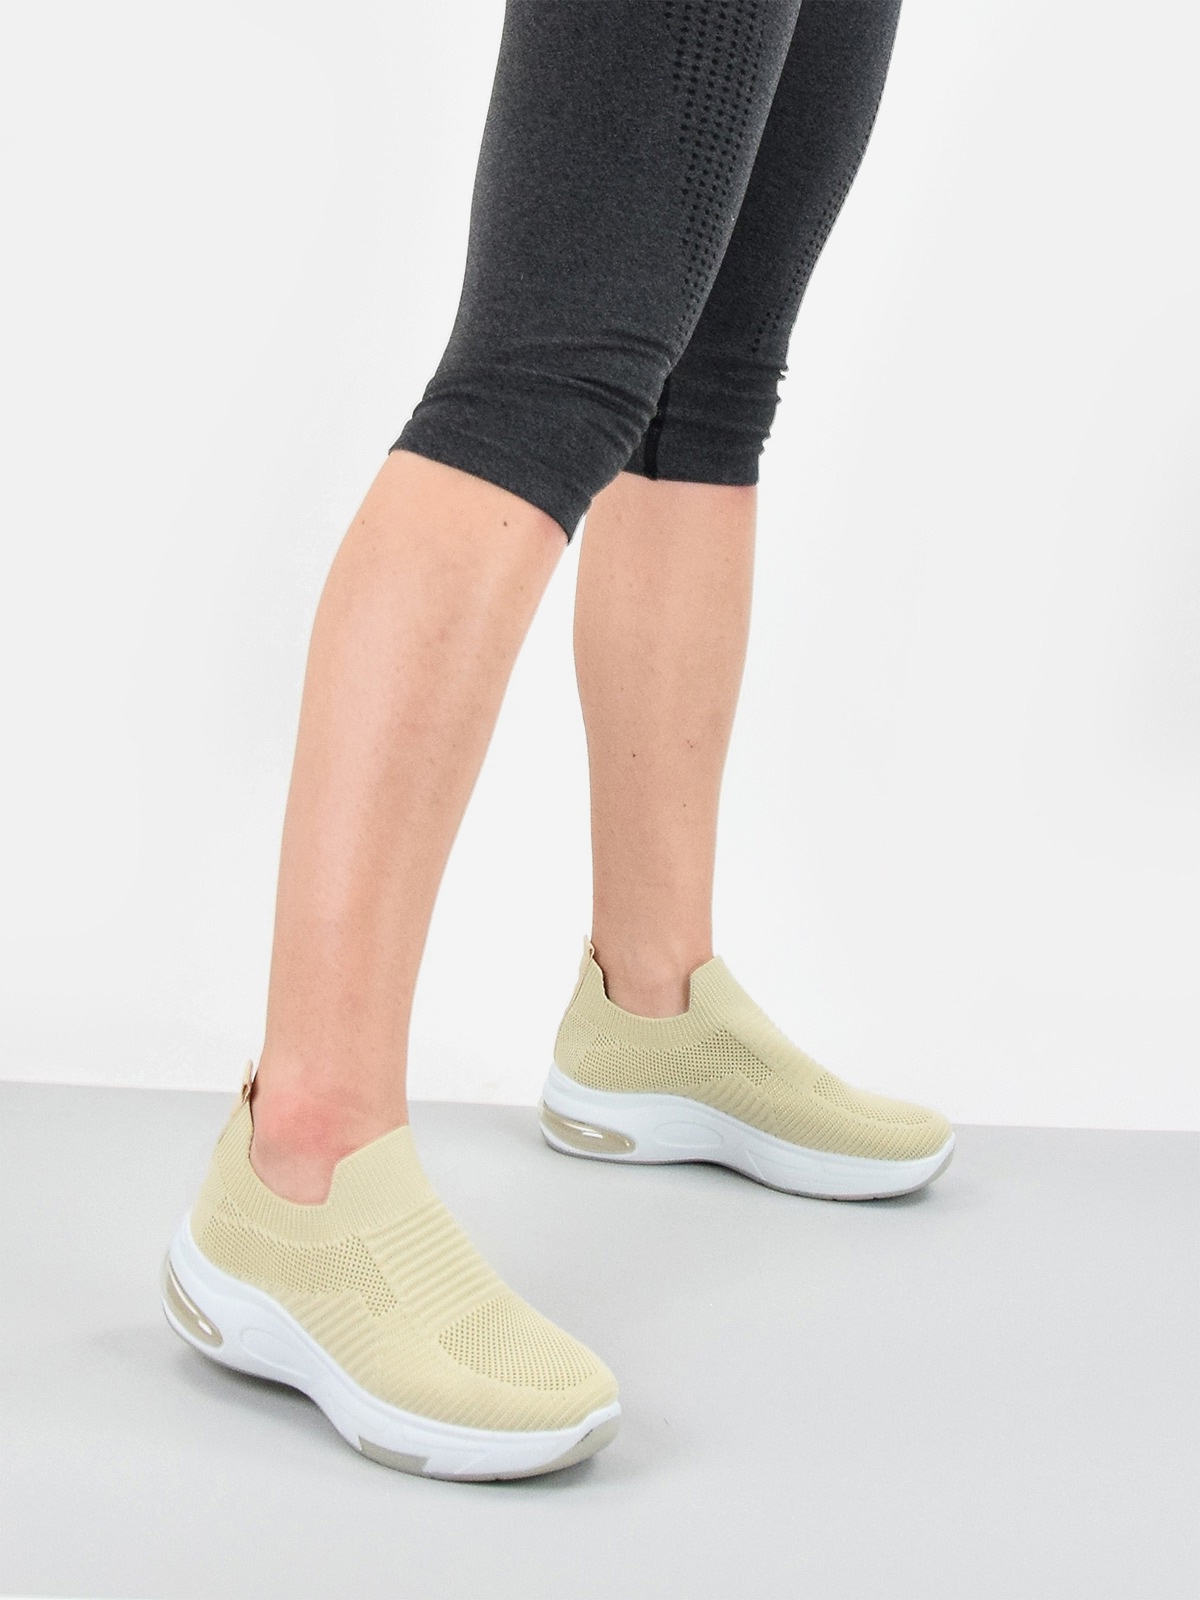 Sock style trainers with white sole in neutral